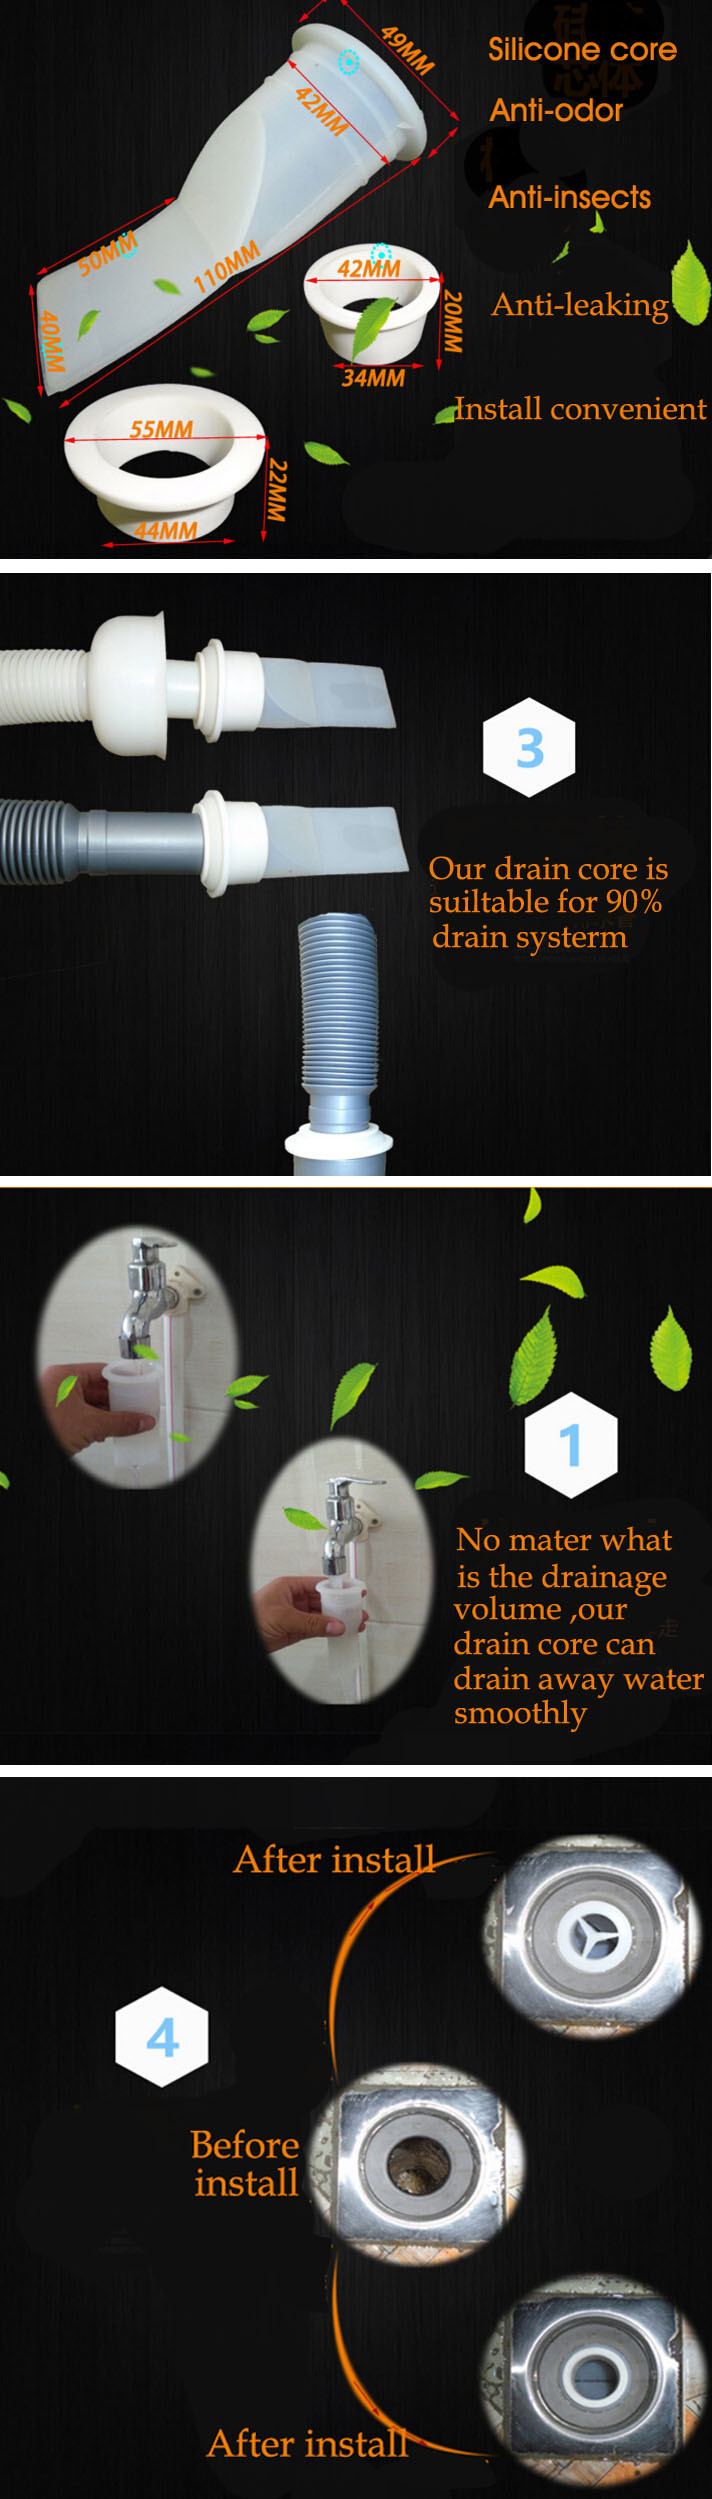 Eco Friendly Anti-Odor & Anti-Insects Silicone Basement Toilet Floor Drain Check Valves